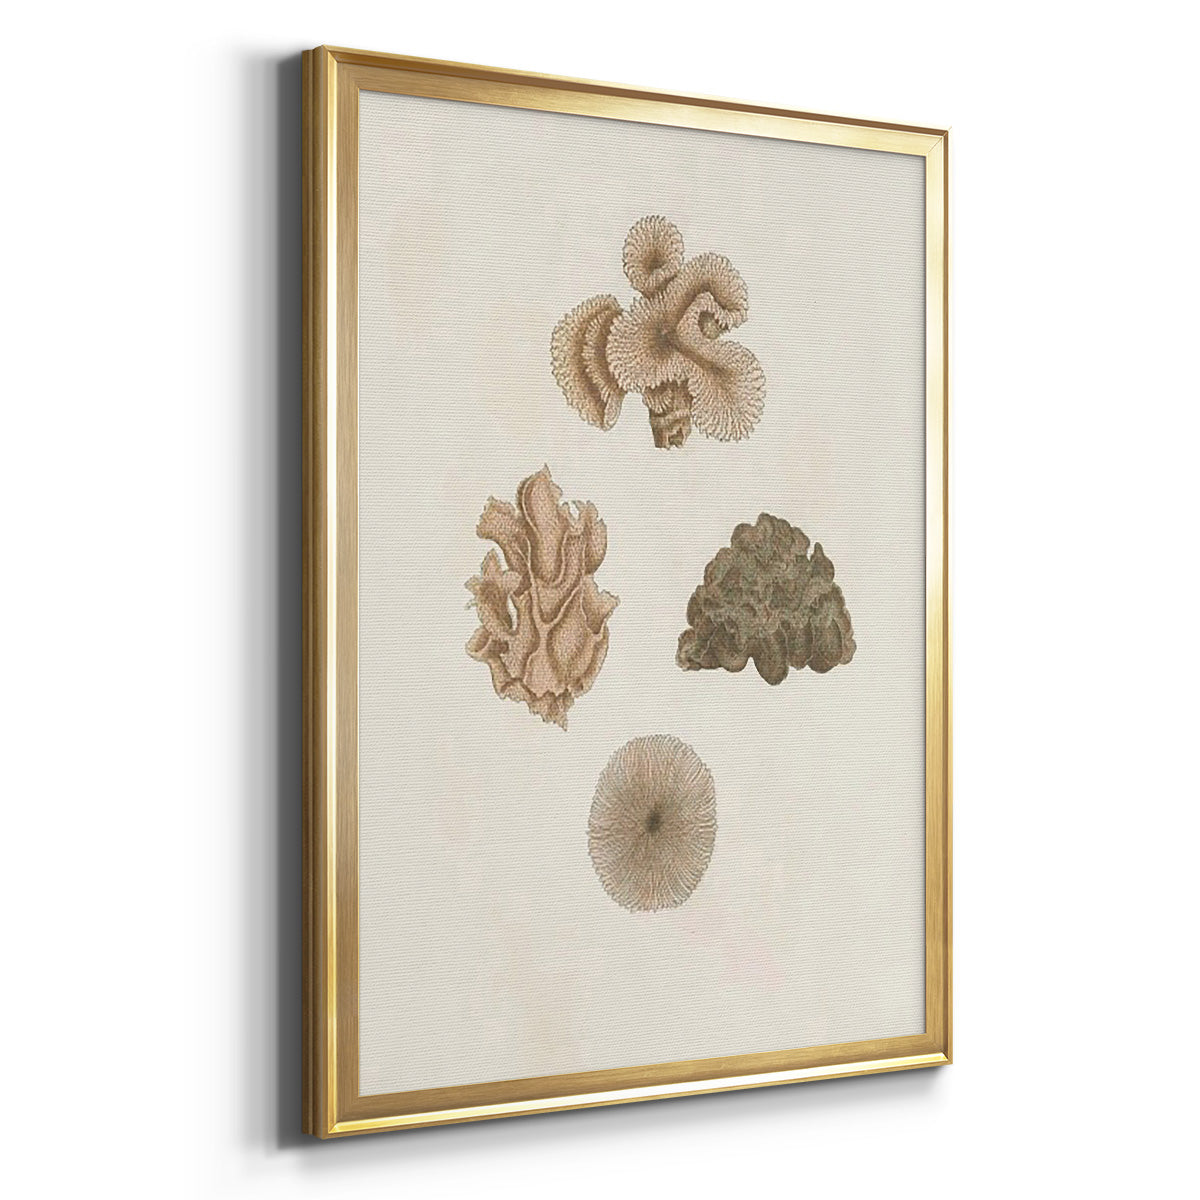 Knorr Shells & Coral VIII Premium Framed Print - Ready to Hang